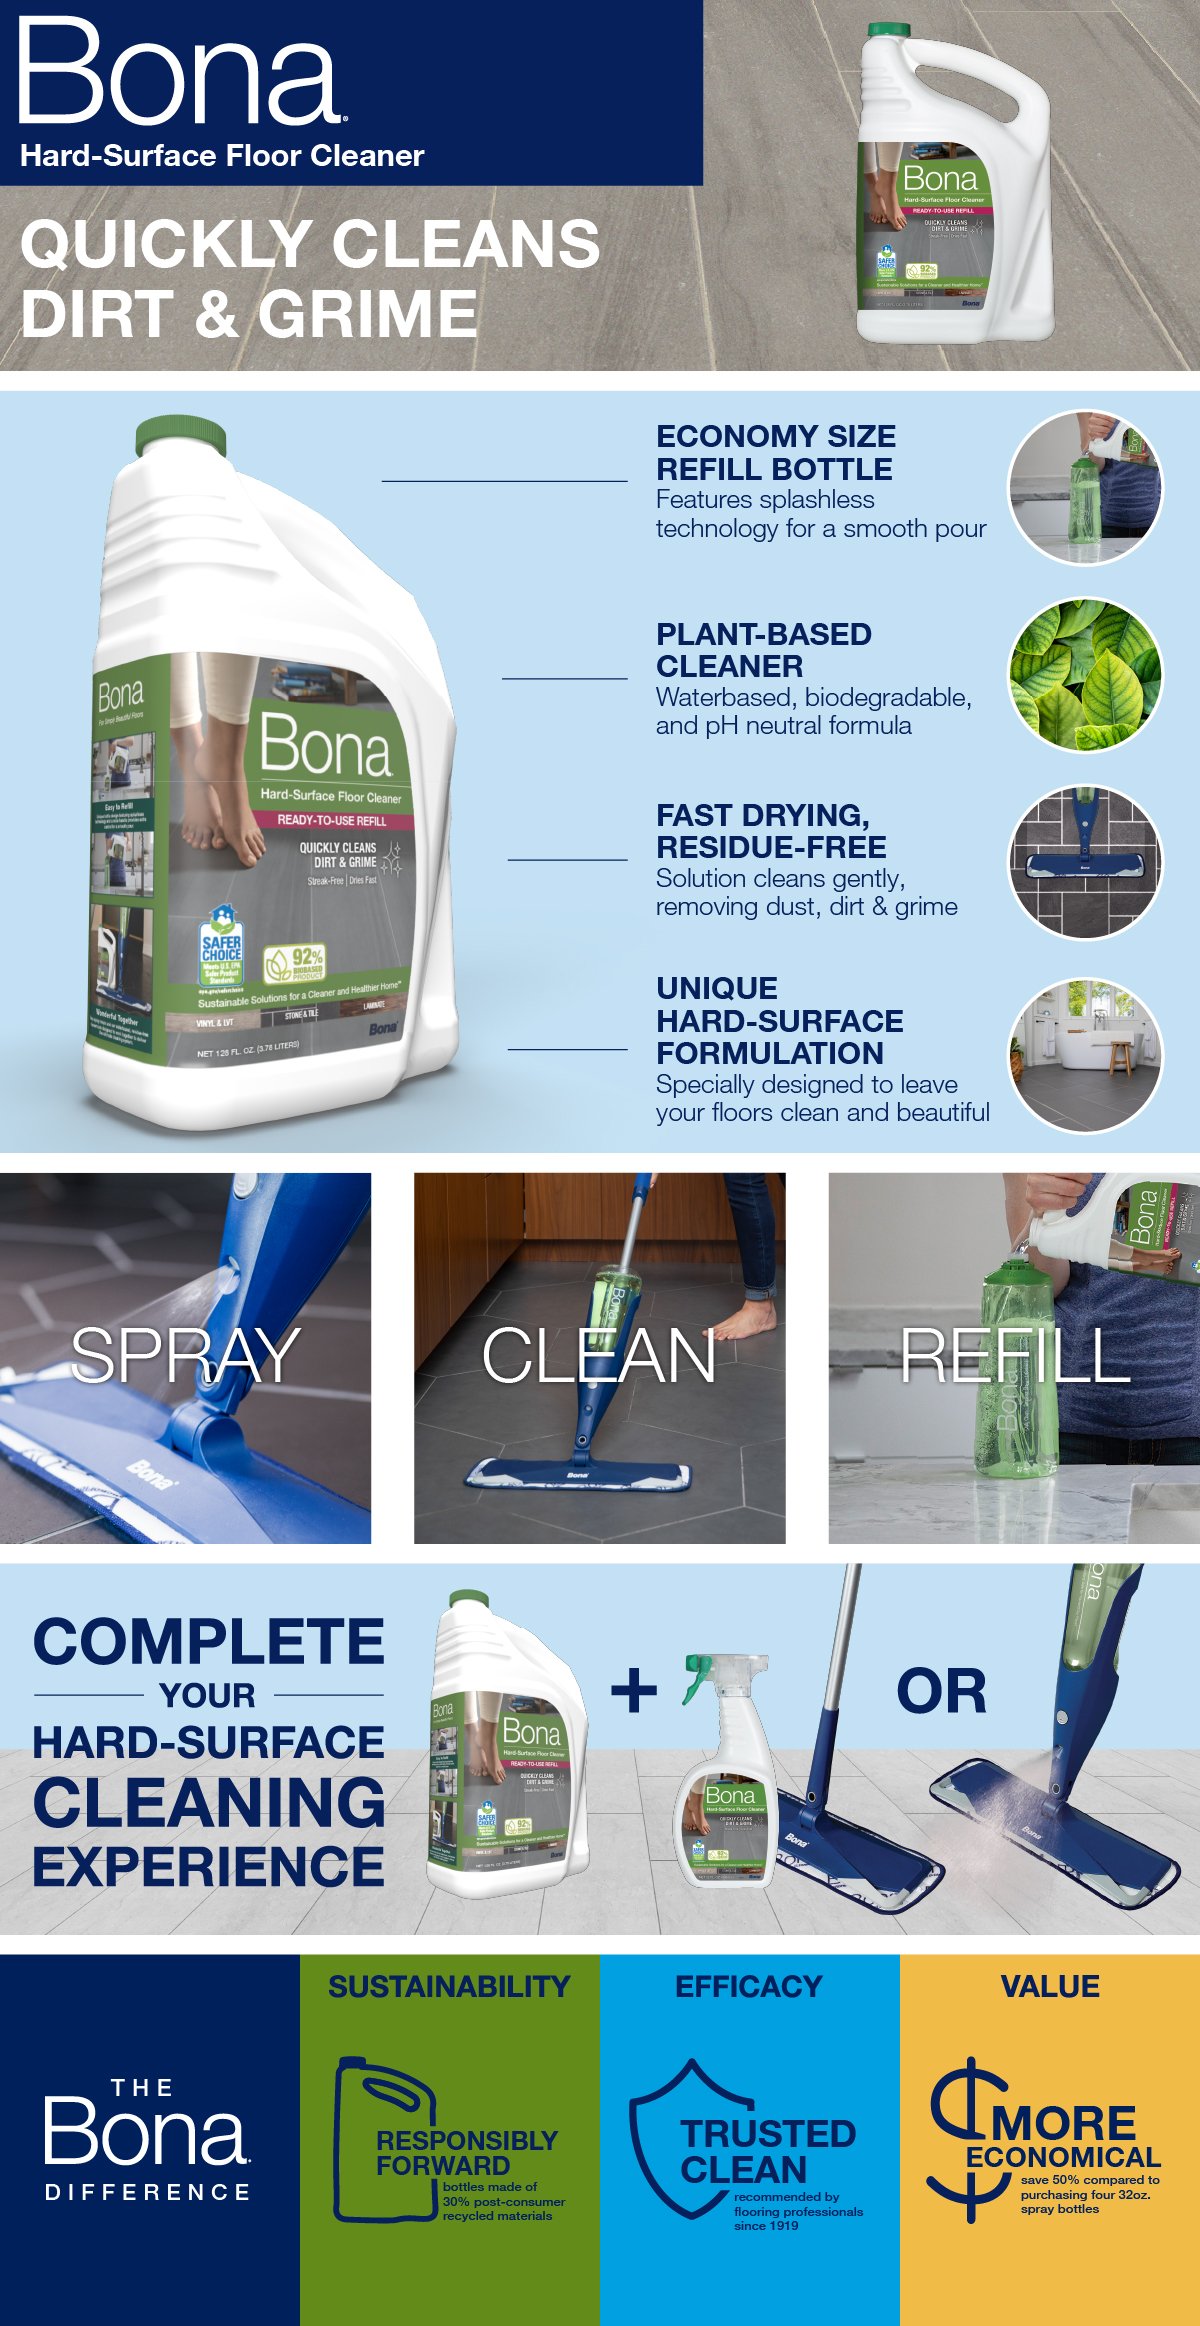 Bona Multi-Surface Floor Cleaner Refill - 128 fl oz - Unscented - Refill  for Bona Spray Mops and Spray Bottles - Residue-Free Floor Cleaning  Solution